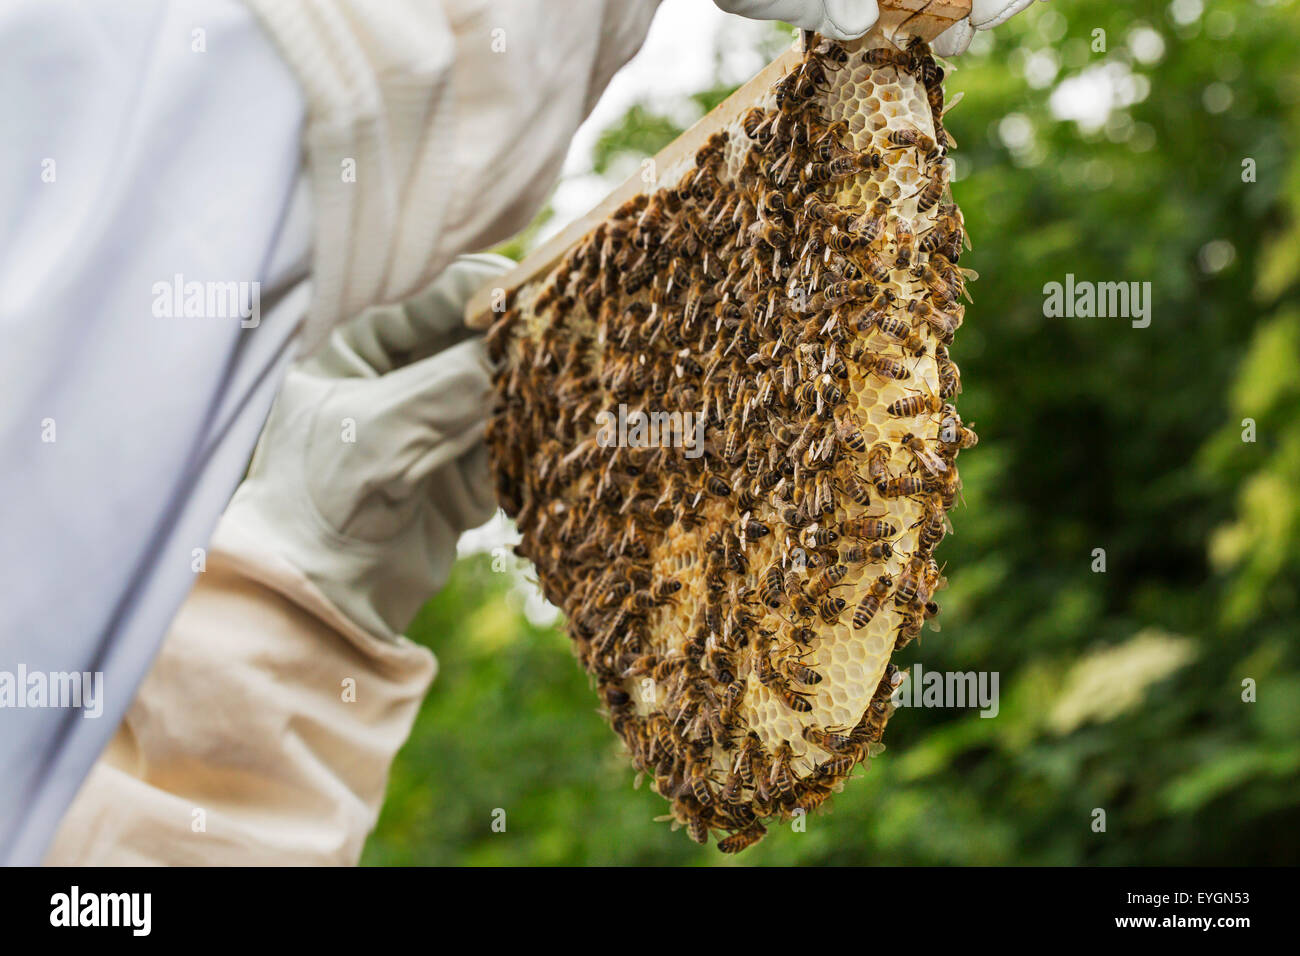 Beekeeper in protective clothing inspecting frame with honeycomb from honey bees (Apis mellifera) Stock Photo